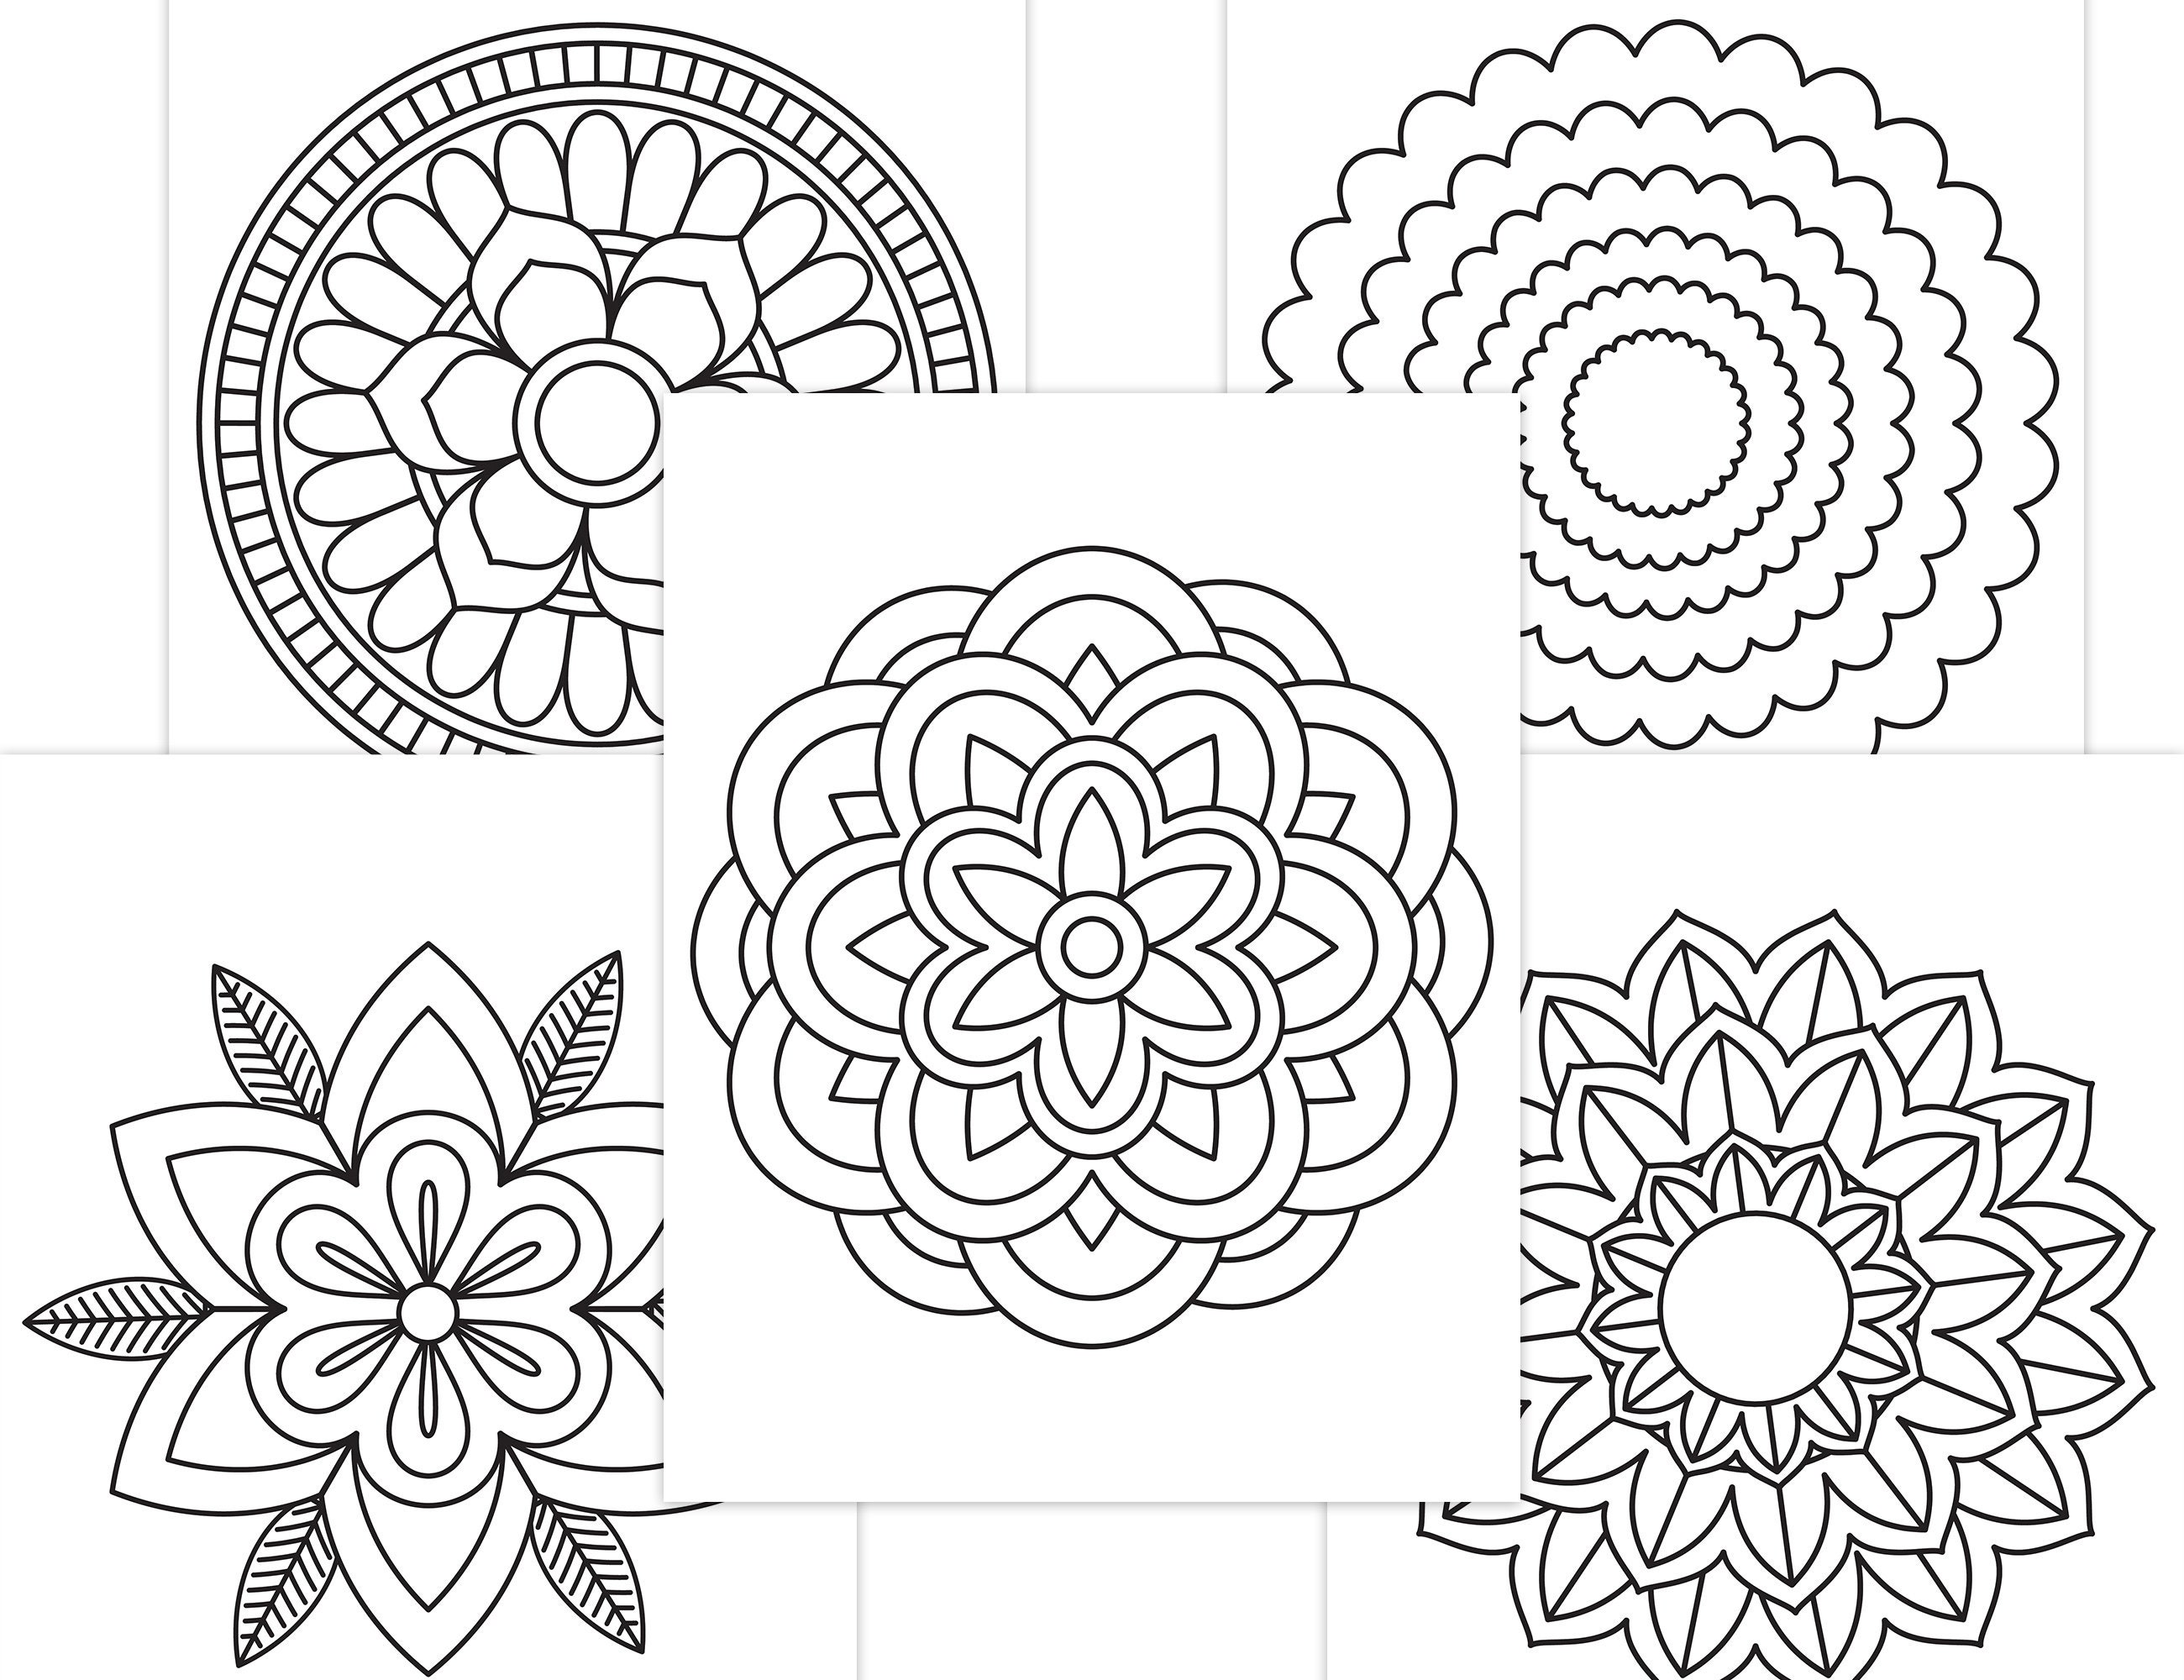 free-mandalas-to-color-for-adults-with-kids-mandala-designs-beginners-print-and-672x870  - Follen Church